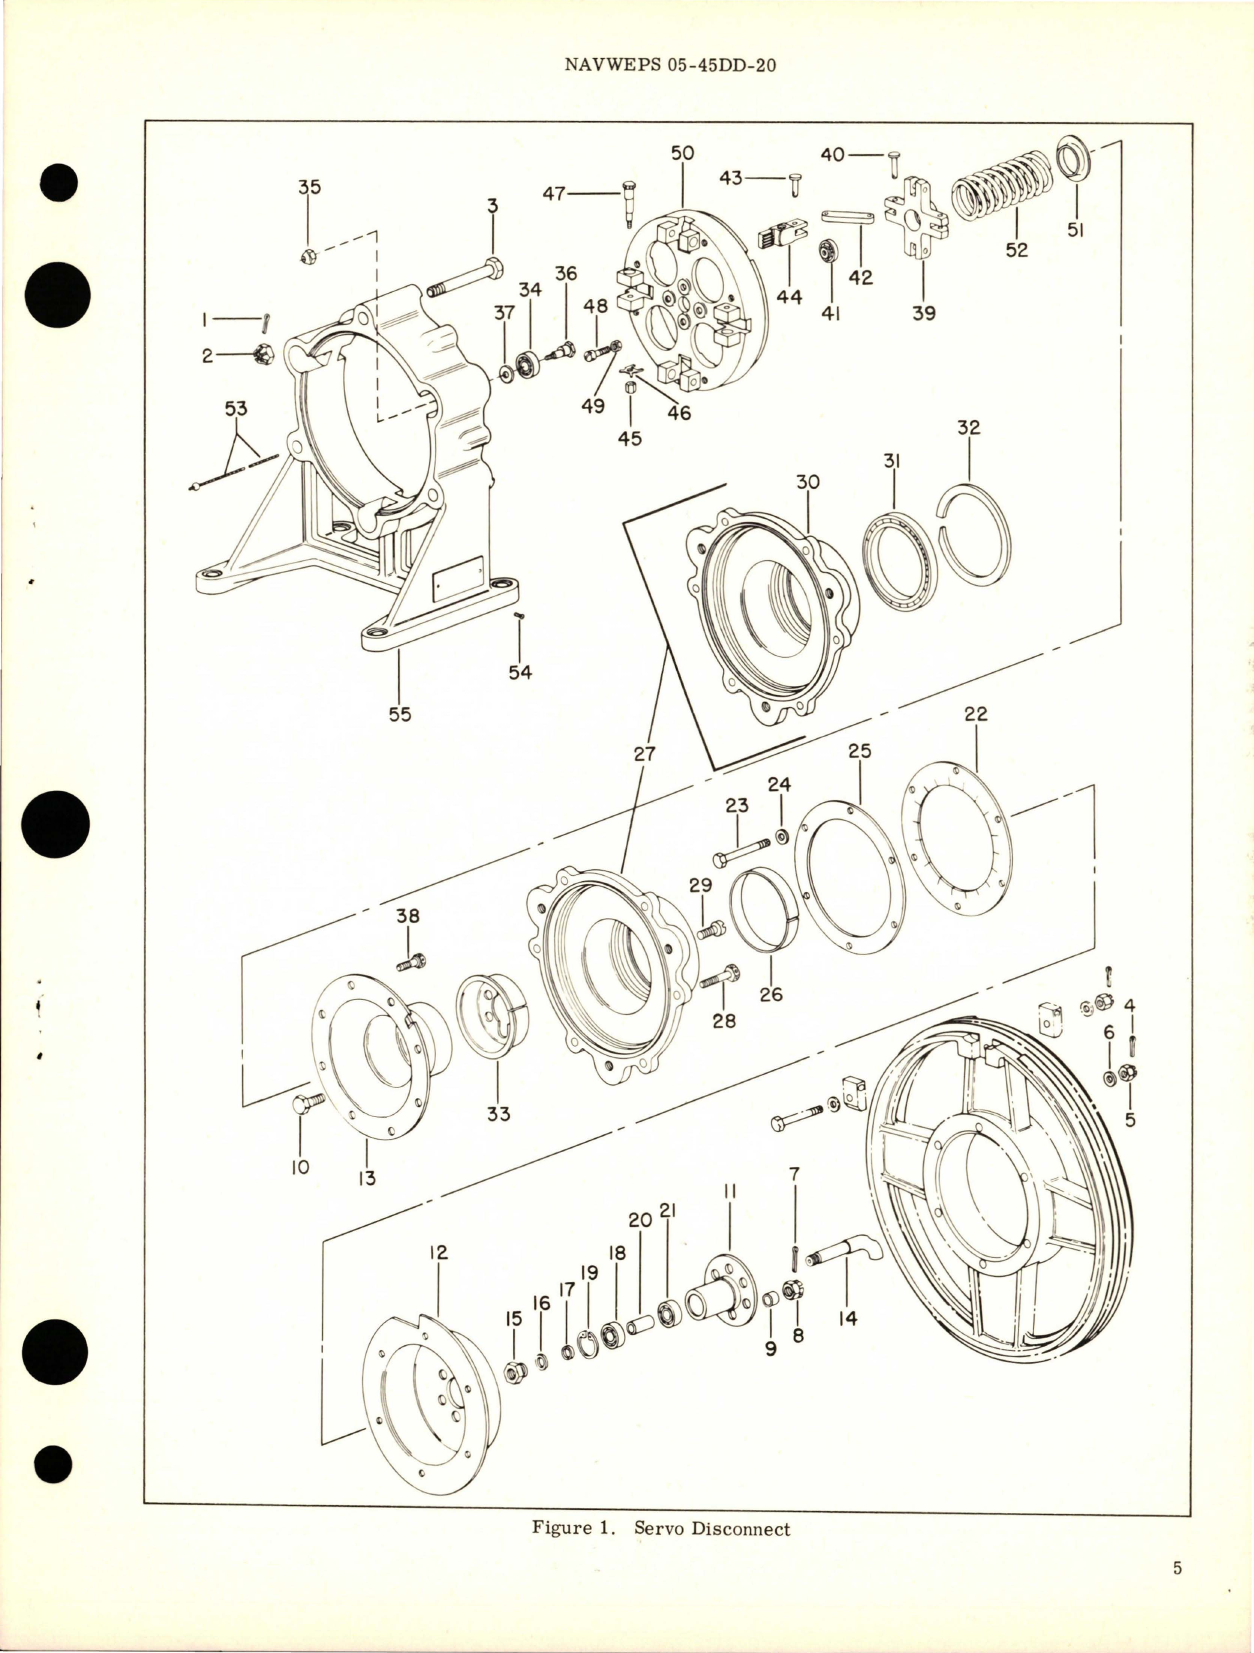 Sample page 5 from AirCorps Library document: Overhaul Instructions with Parts for Servo Disconnect - Type DQ-15-A3